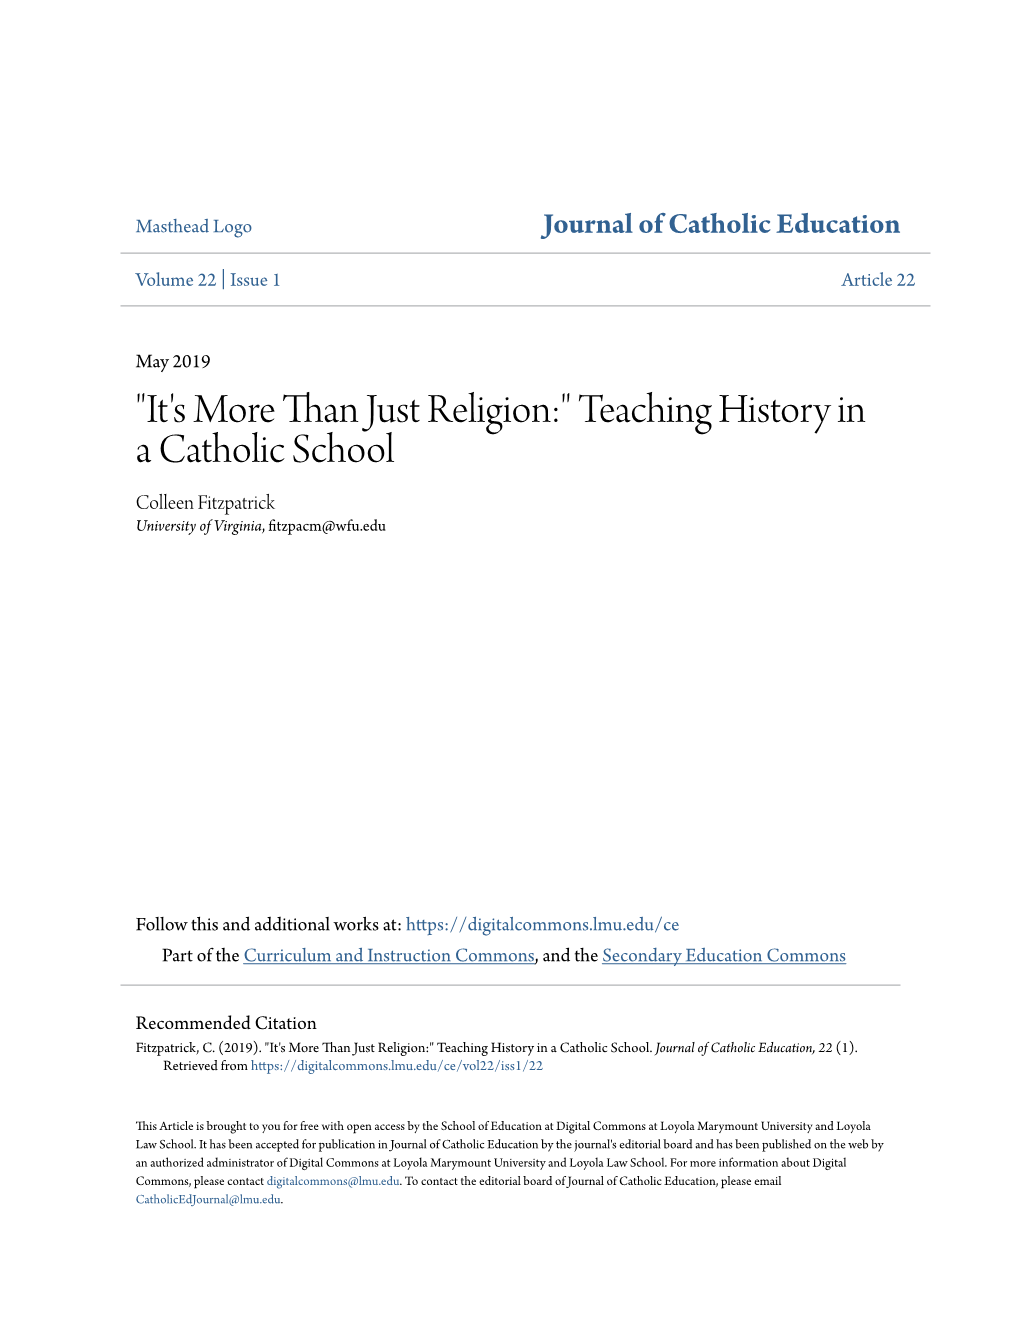 "It's More Than Just Religion:" Teaching History in a Catholic School Colleen Fitzpatrick University of Virginia, Fitzpacm@Wfu.Edu